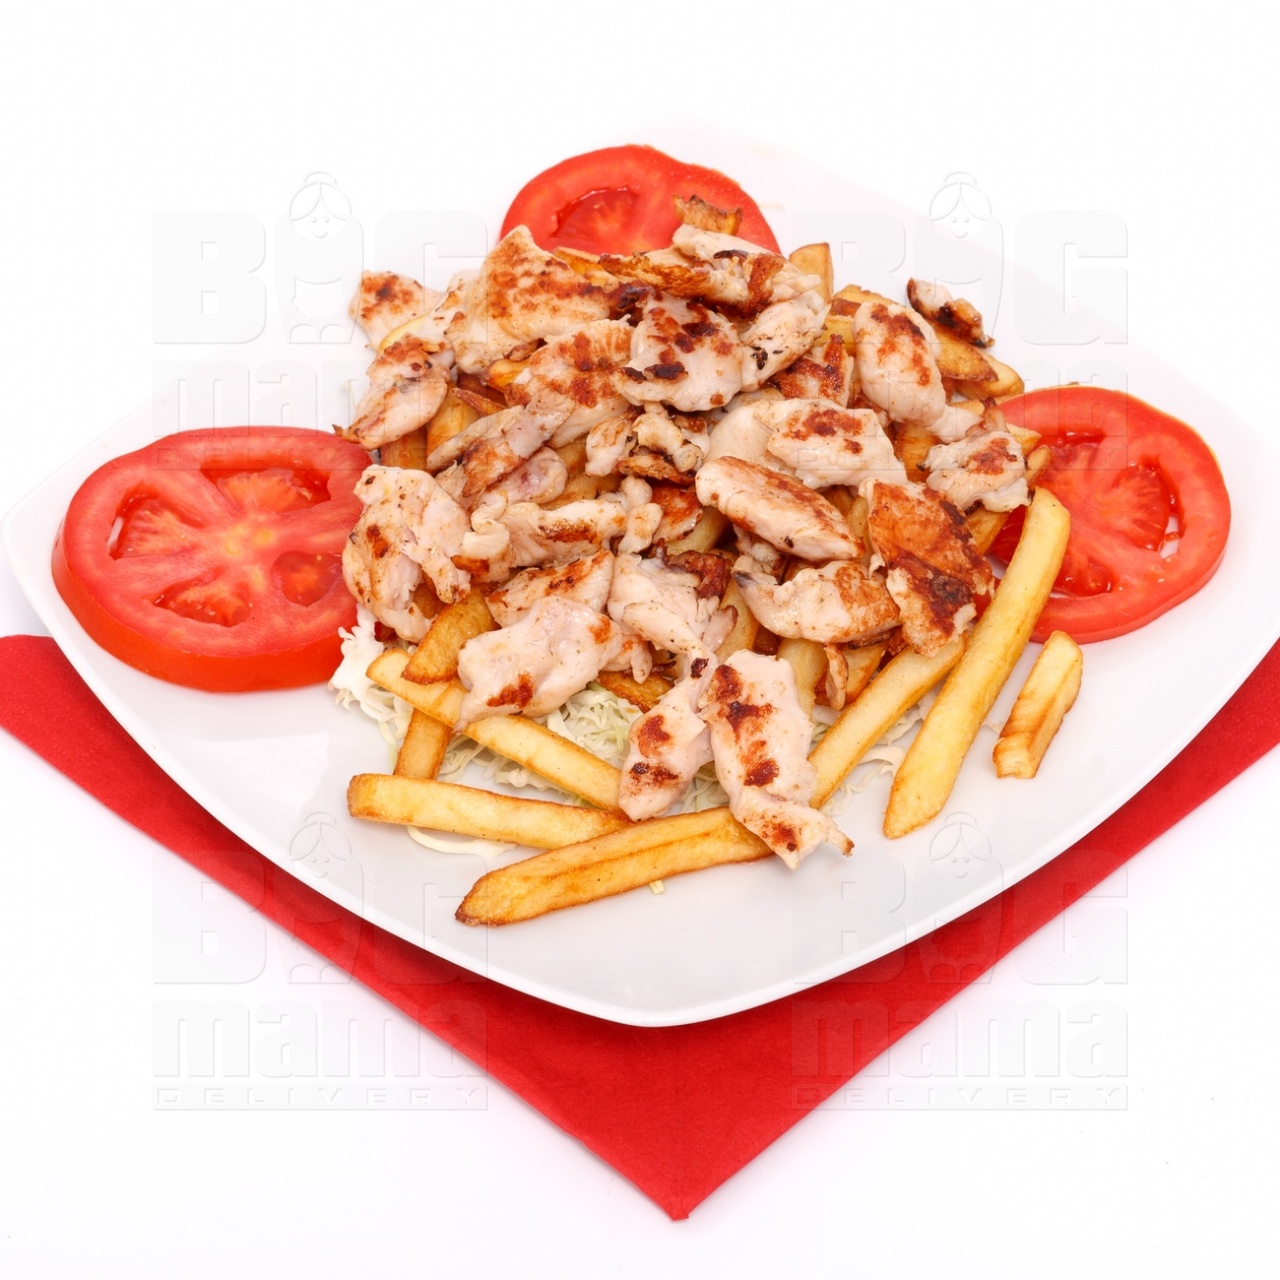 Product #12 image - Maxi kebab with sauce